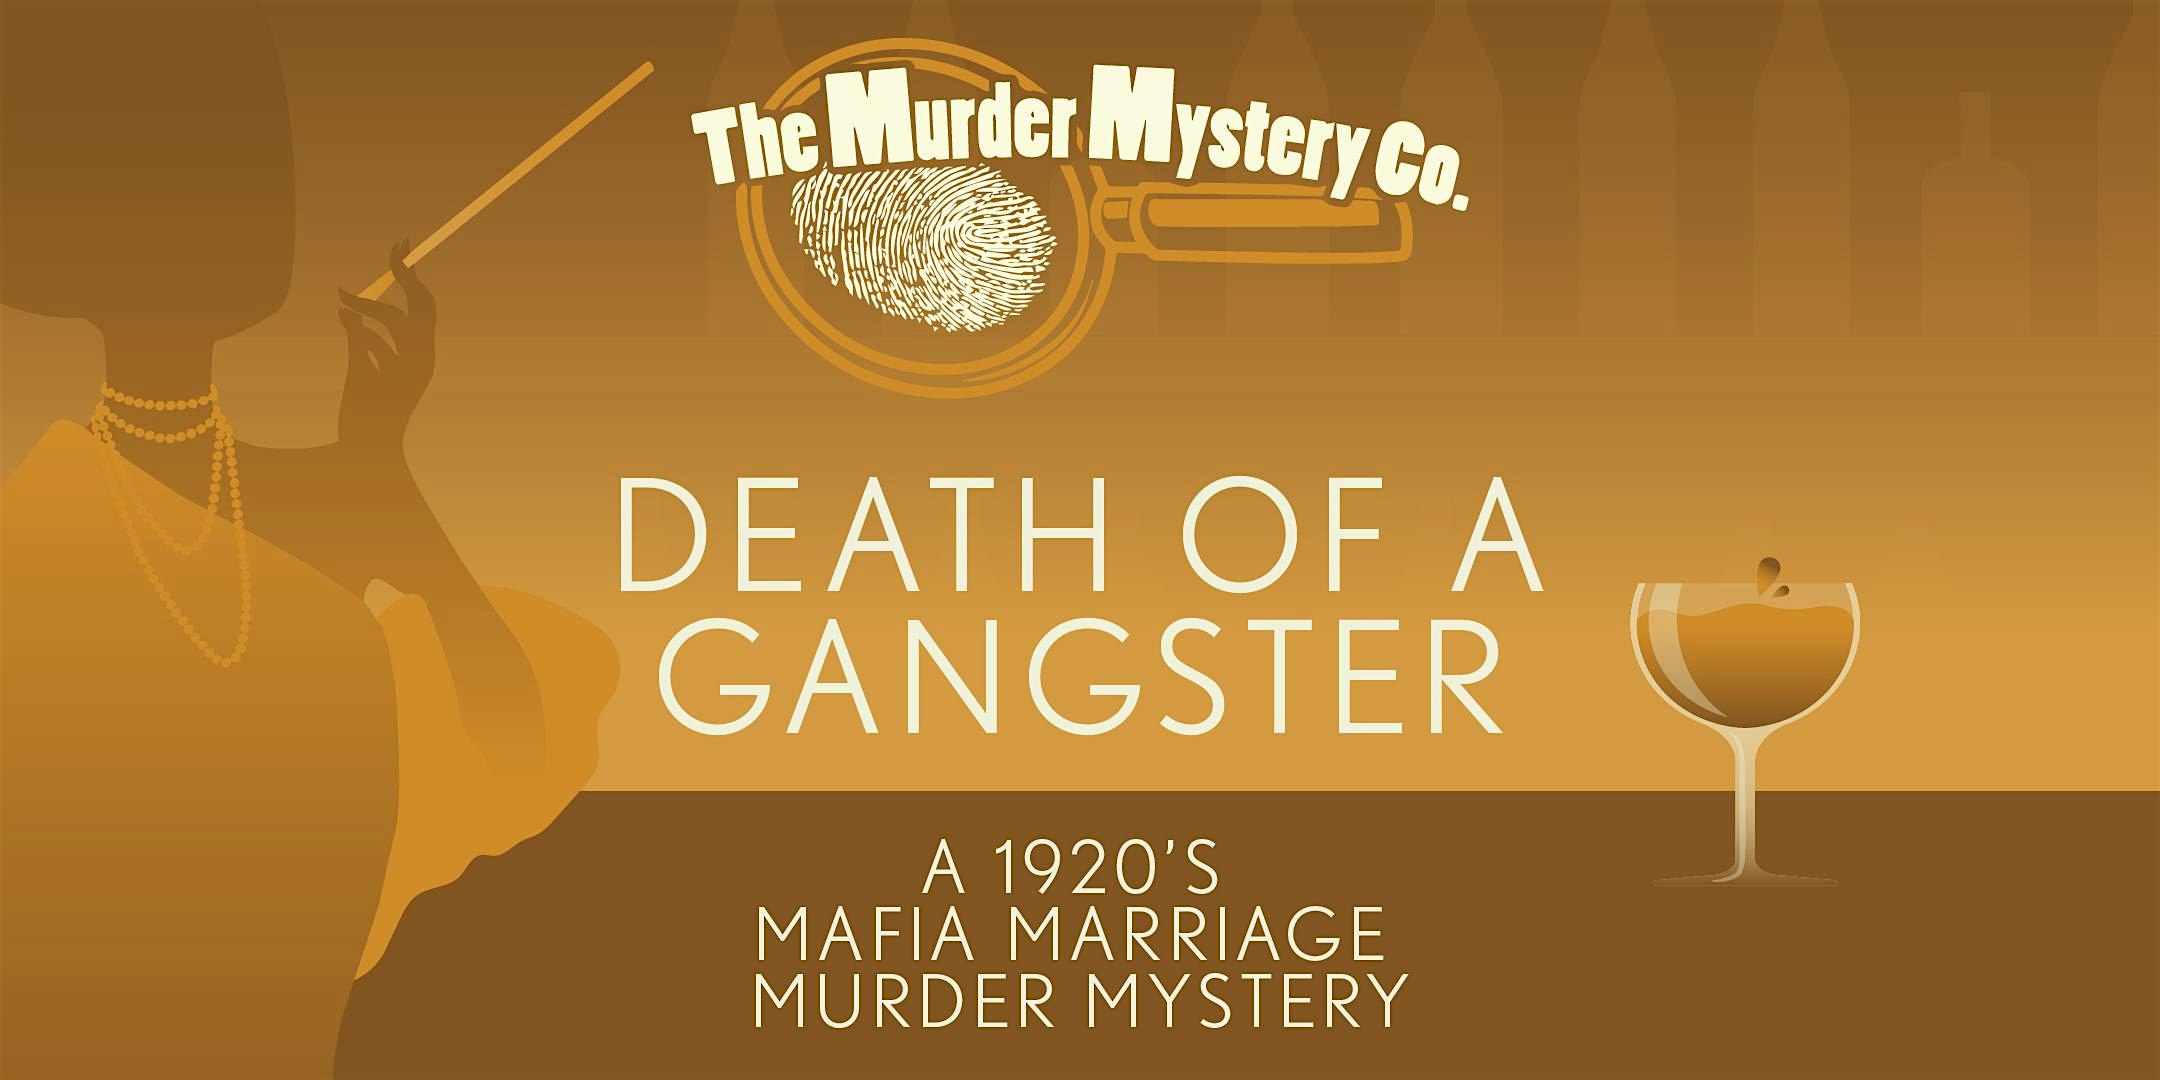 Murder Mystery Dinner Theater Show in Chicago: Death of a Gangster